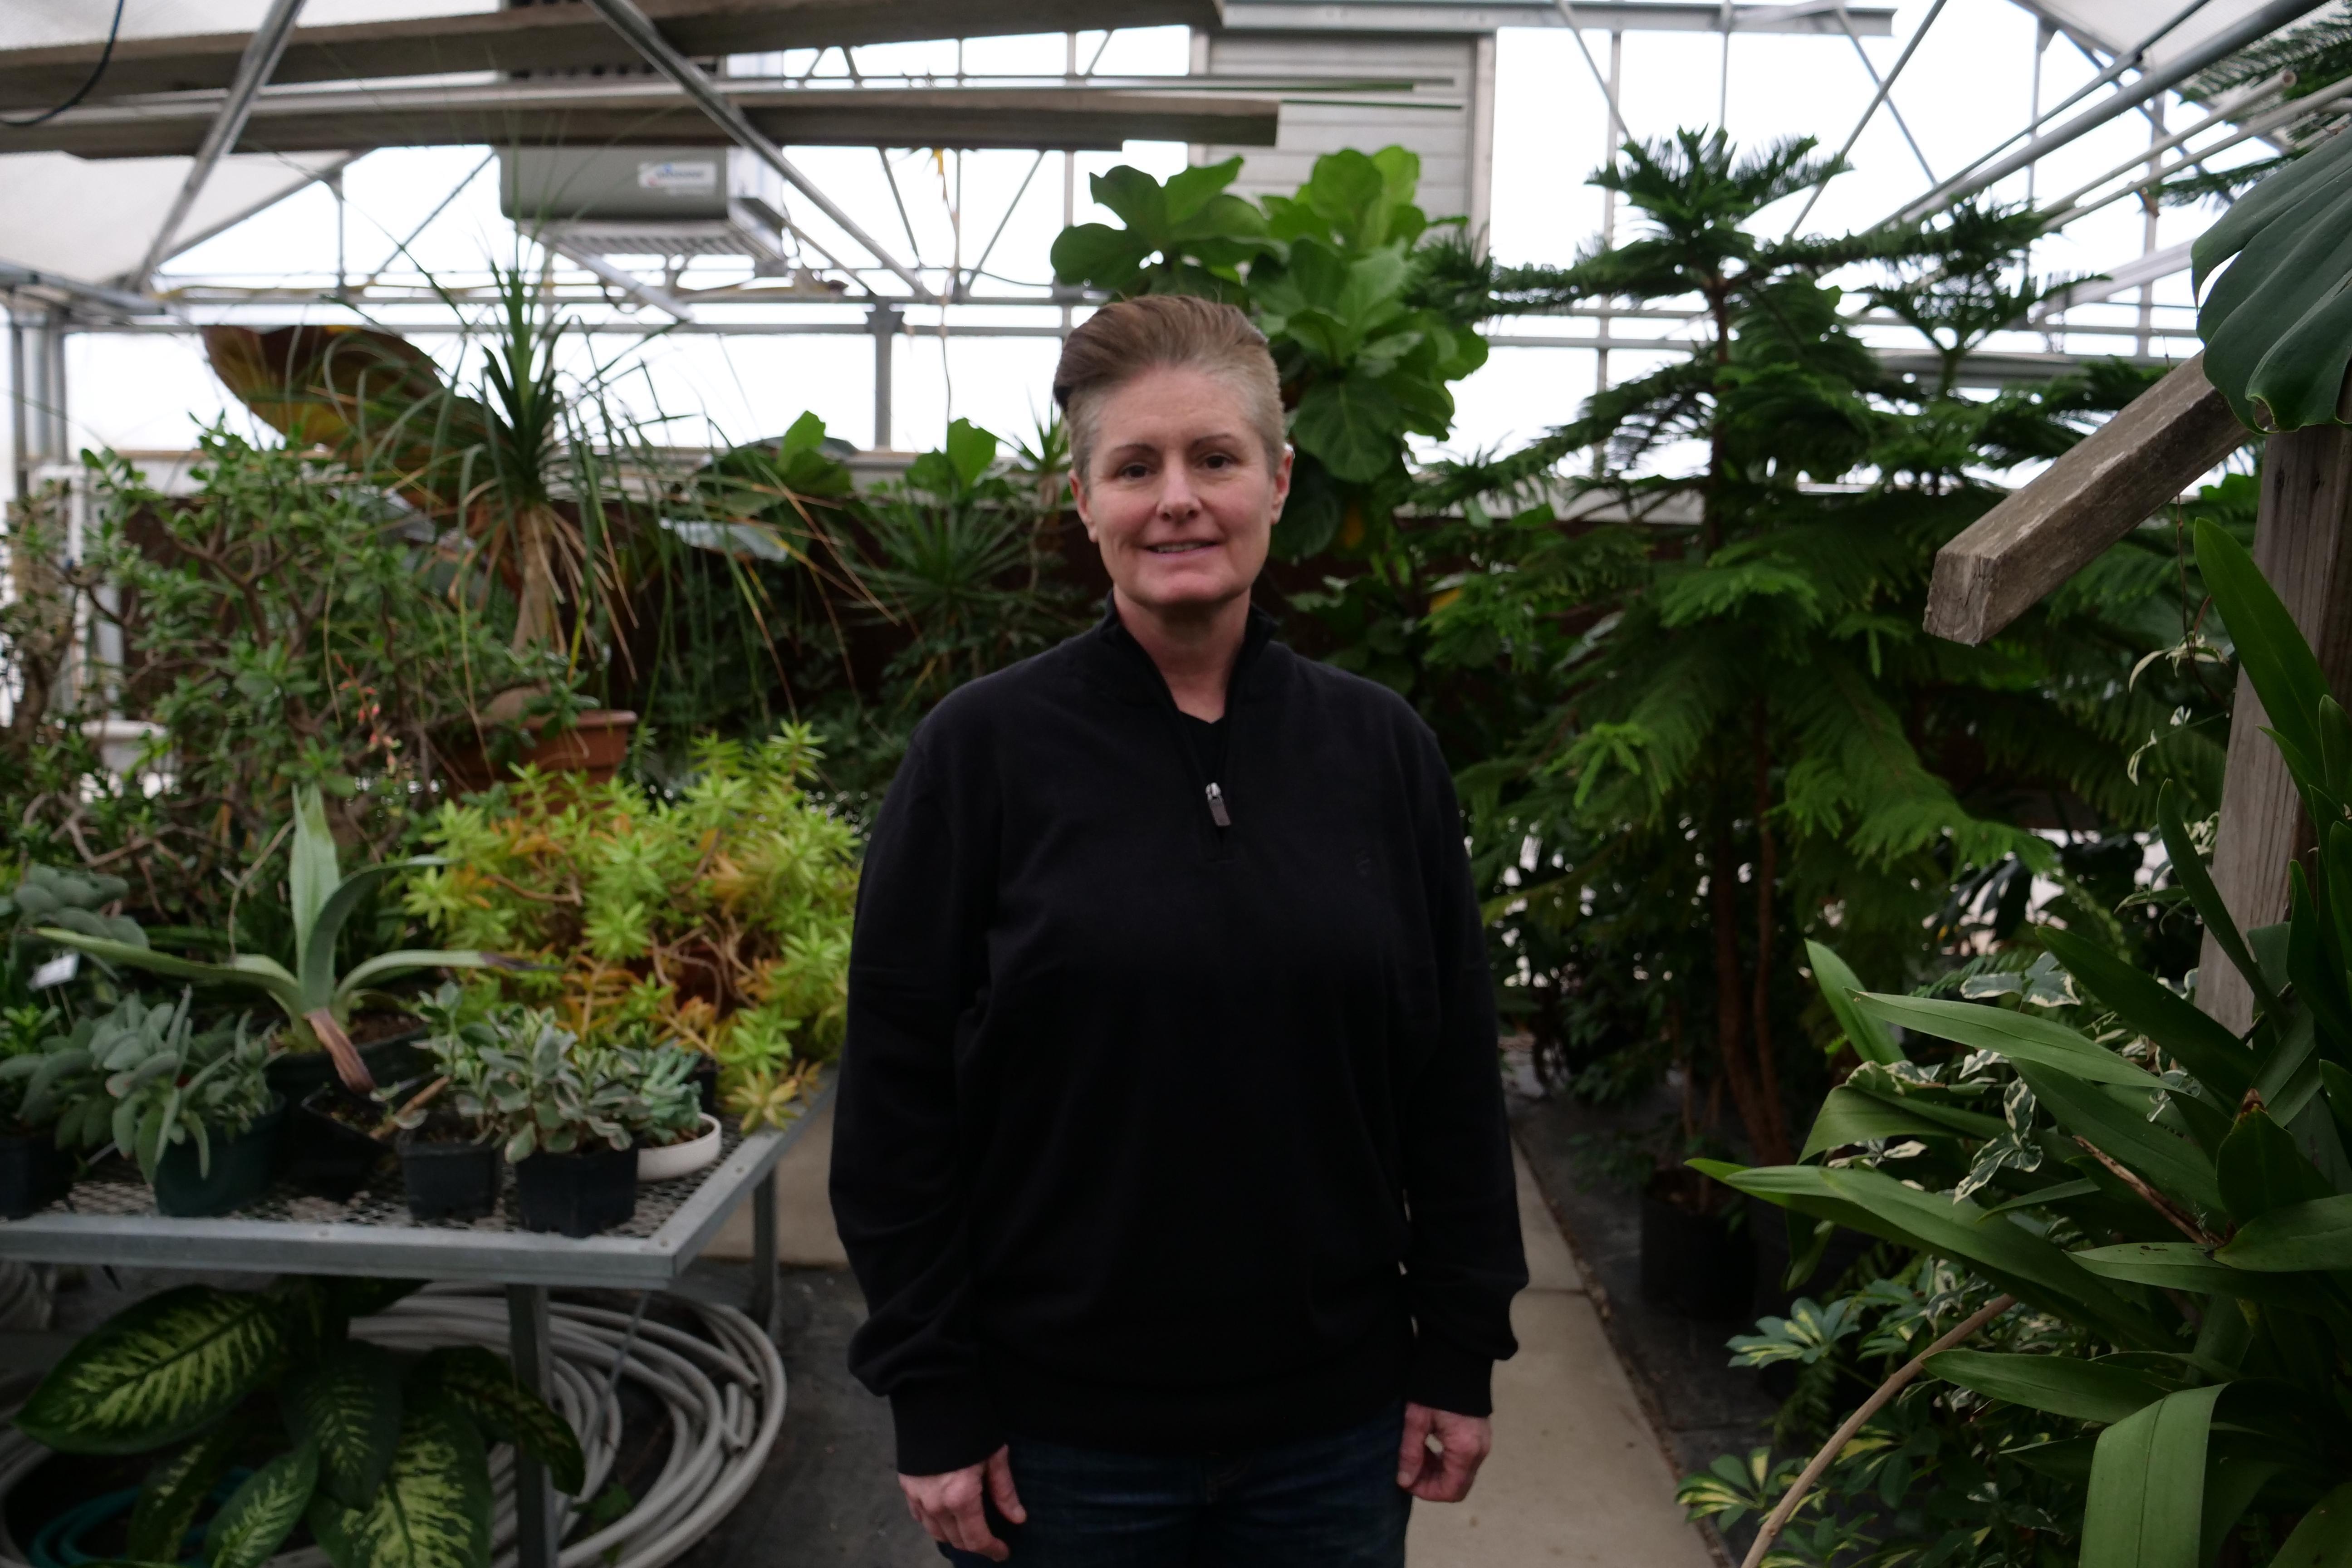 Never Quit Service Award winner Amy Coonce inside a greenhouse smiling at the camera.